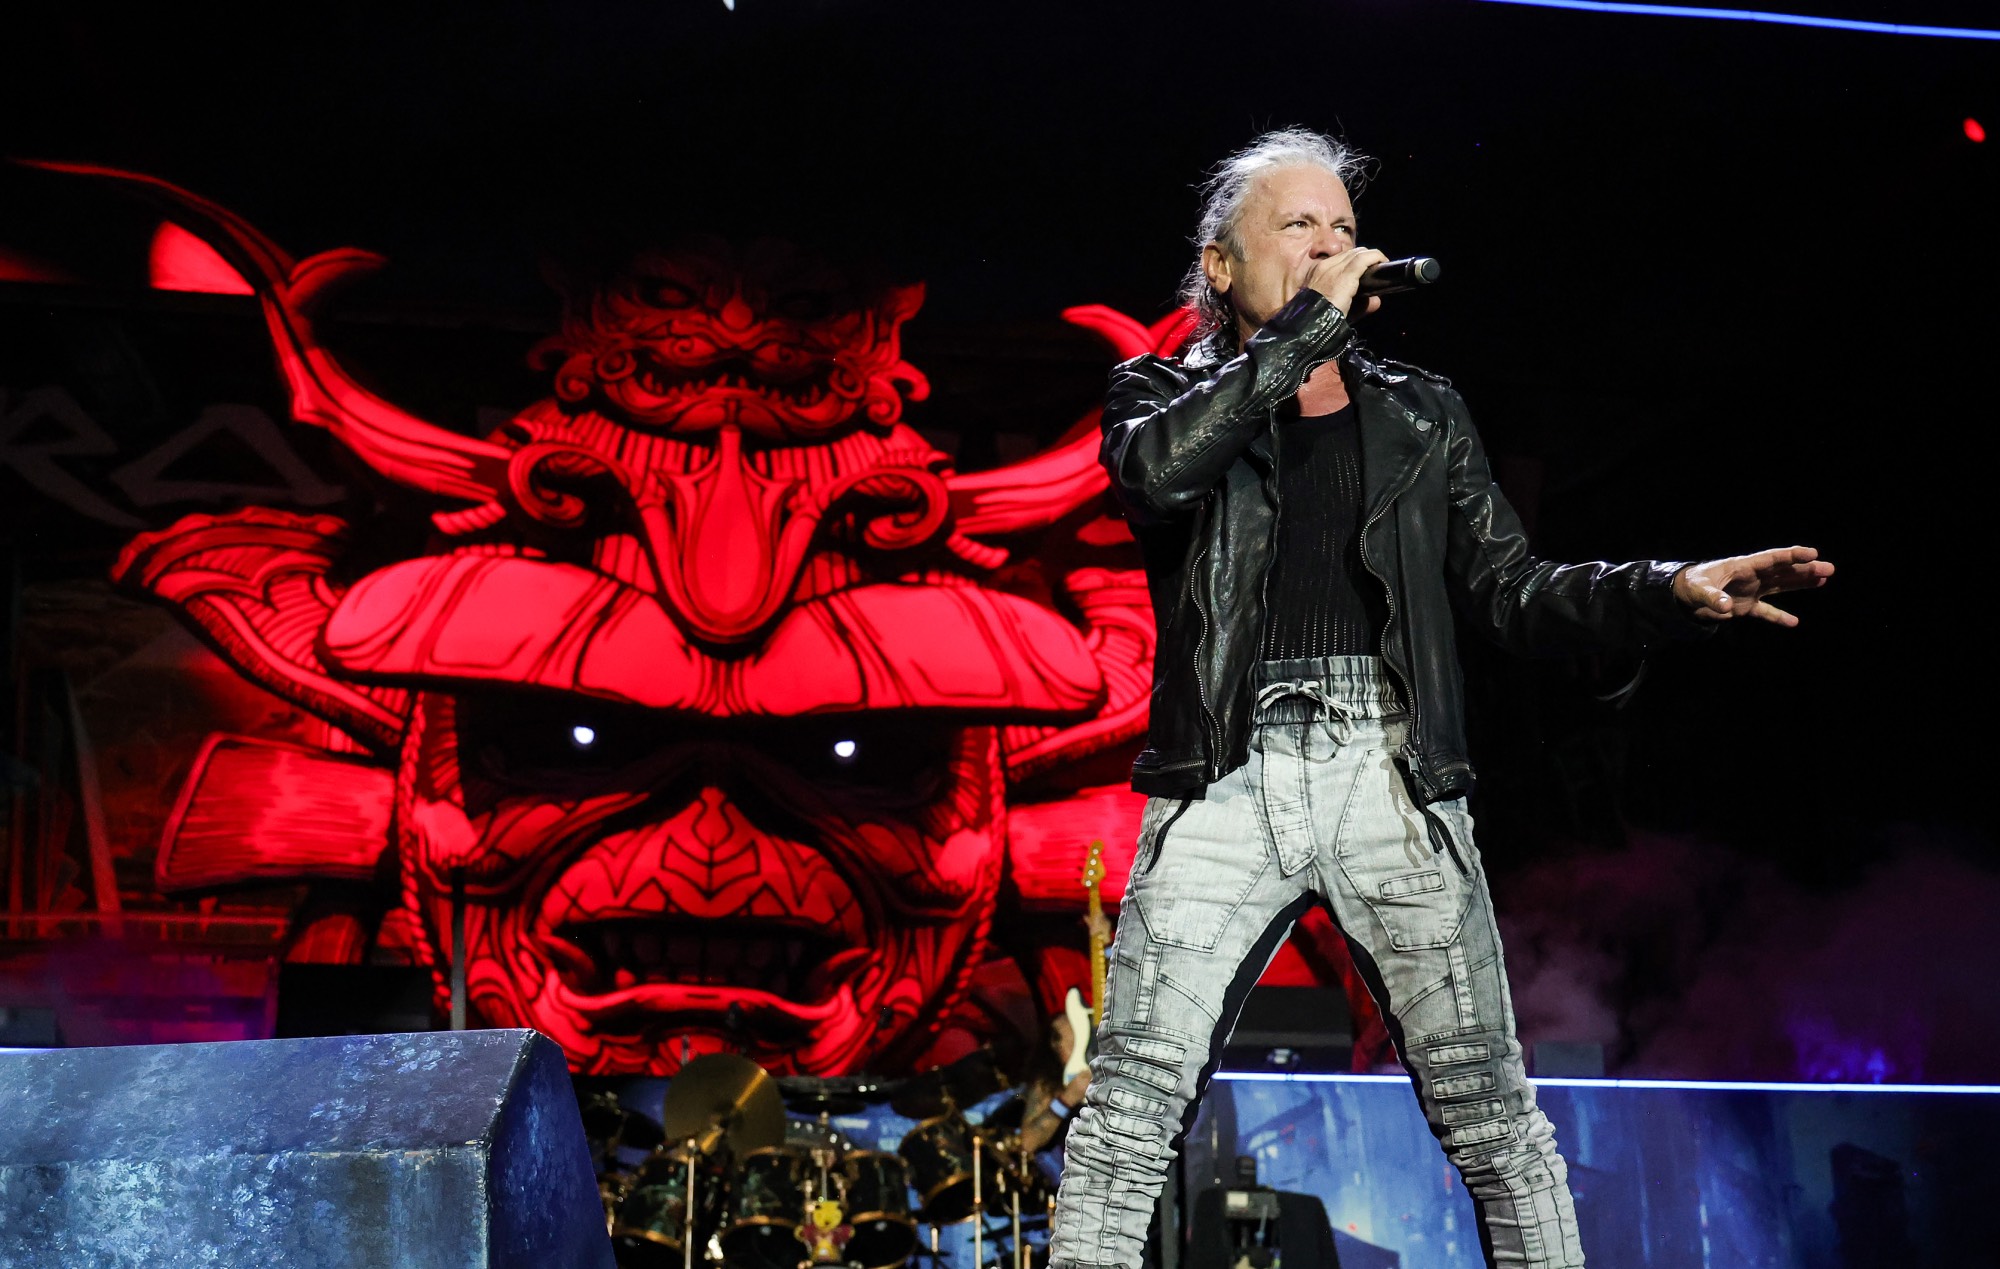 Iron Maiden’s Bruce Dickinson: “I’ve got no interest in paying $1,200 to see U2”